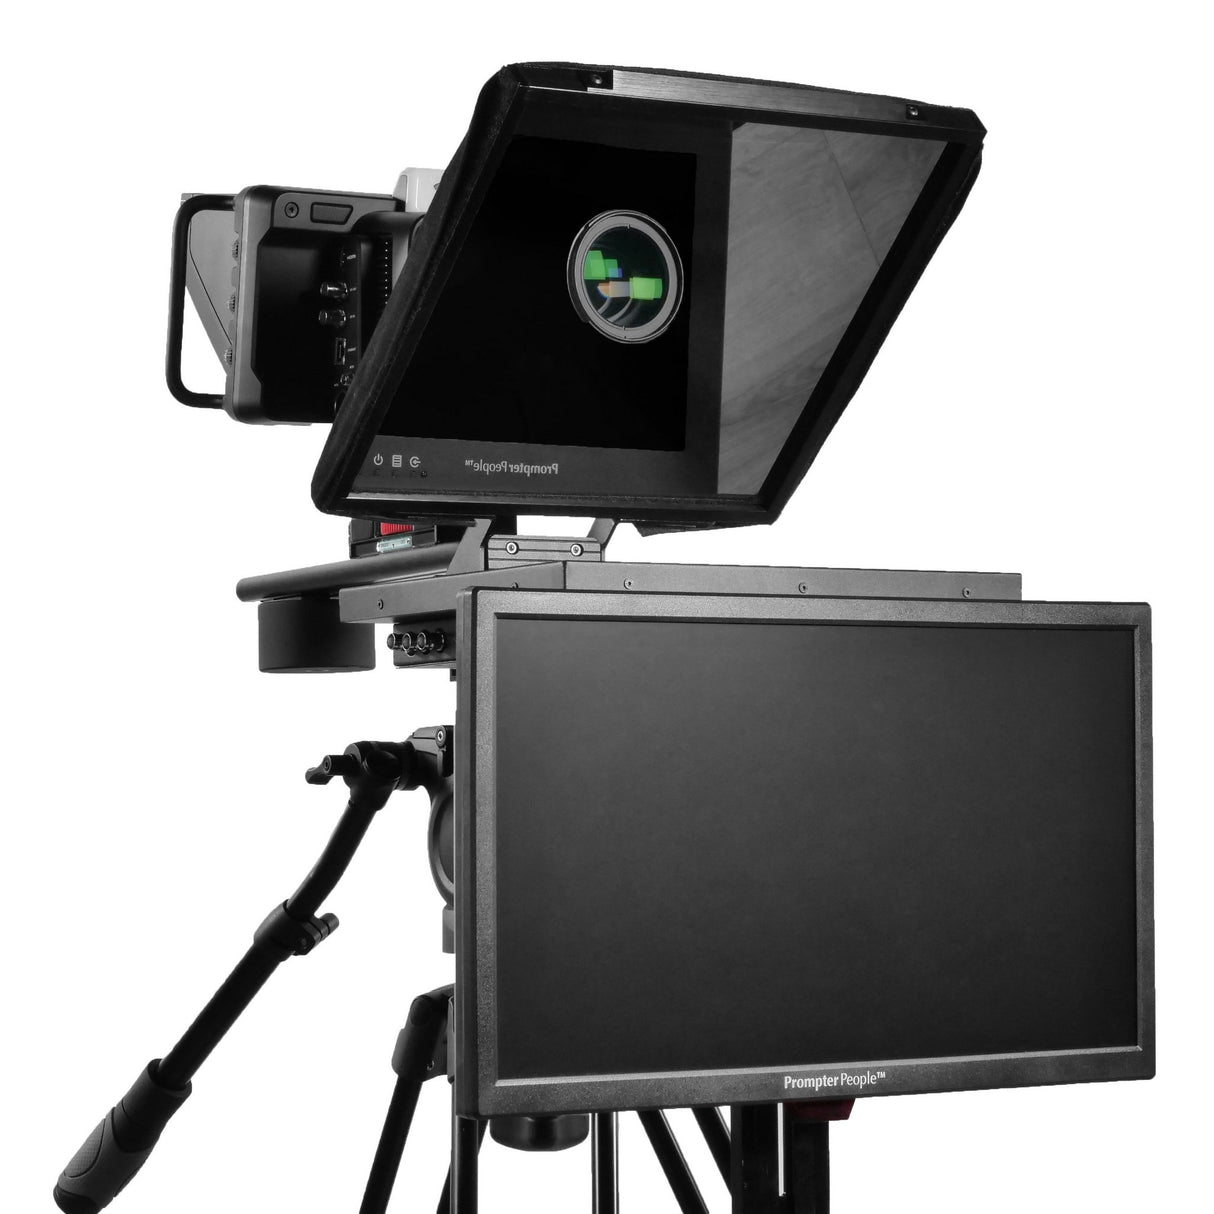 Prompter People Prompter Pal Pro 3G-SDI 18.5-Inch Talent Monitor Teleprompter with 12-Inch 3G-SDI Monitor, 400 NIT